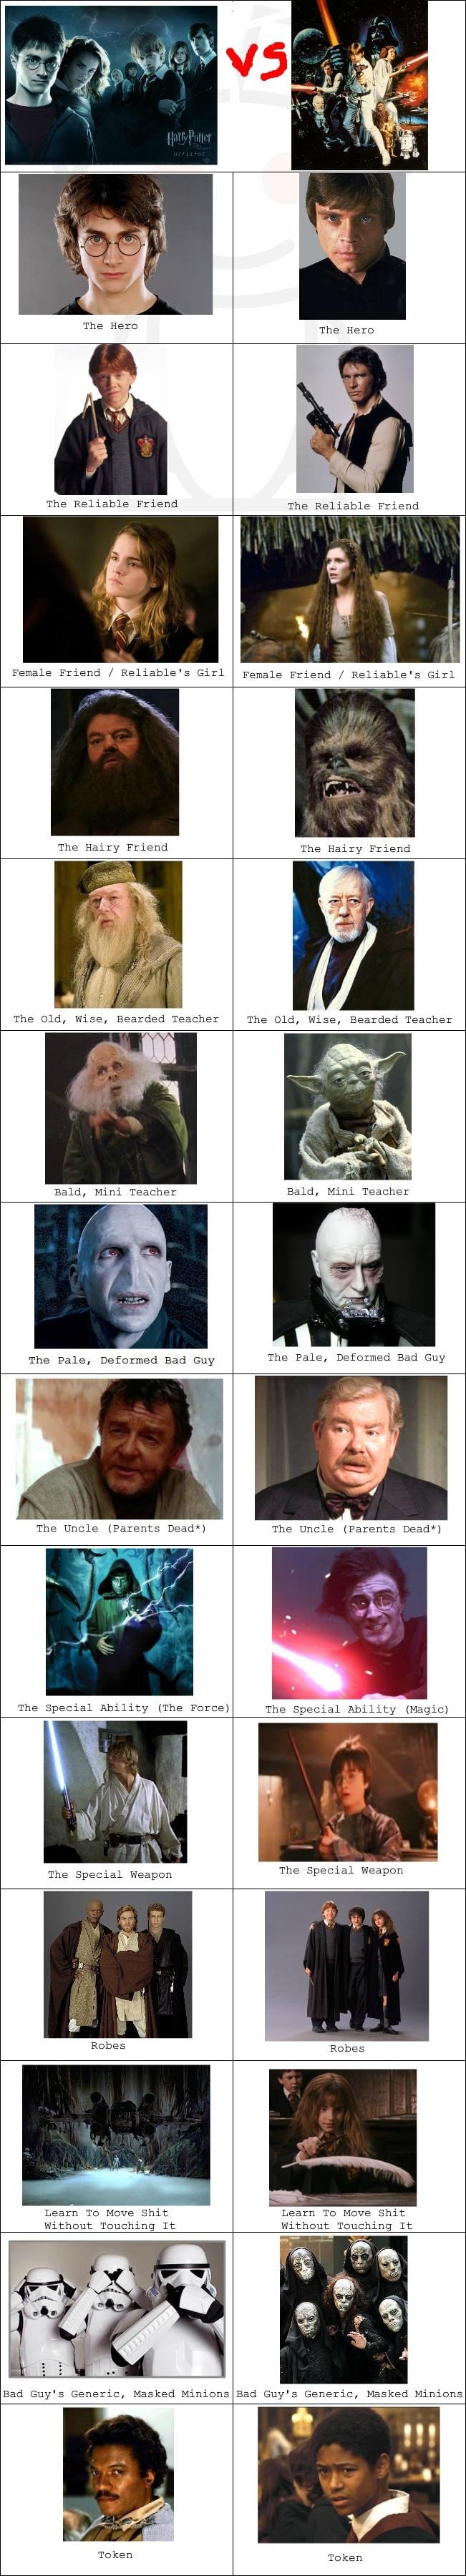 Harry Potter vs. Star Wars: The Similarities Are Striking